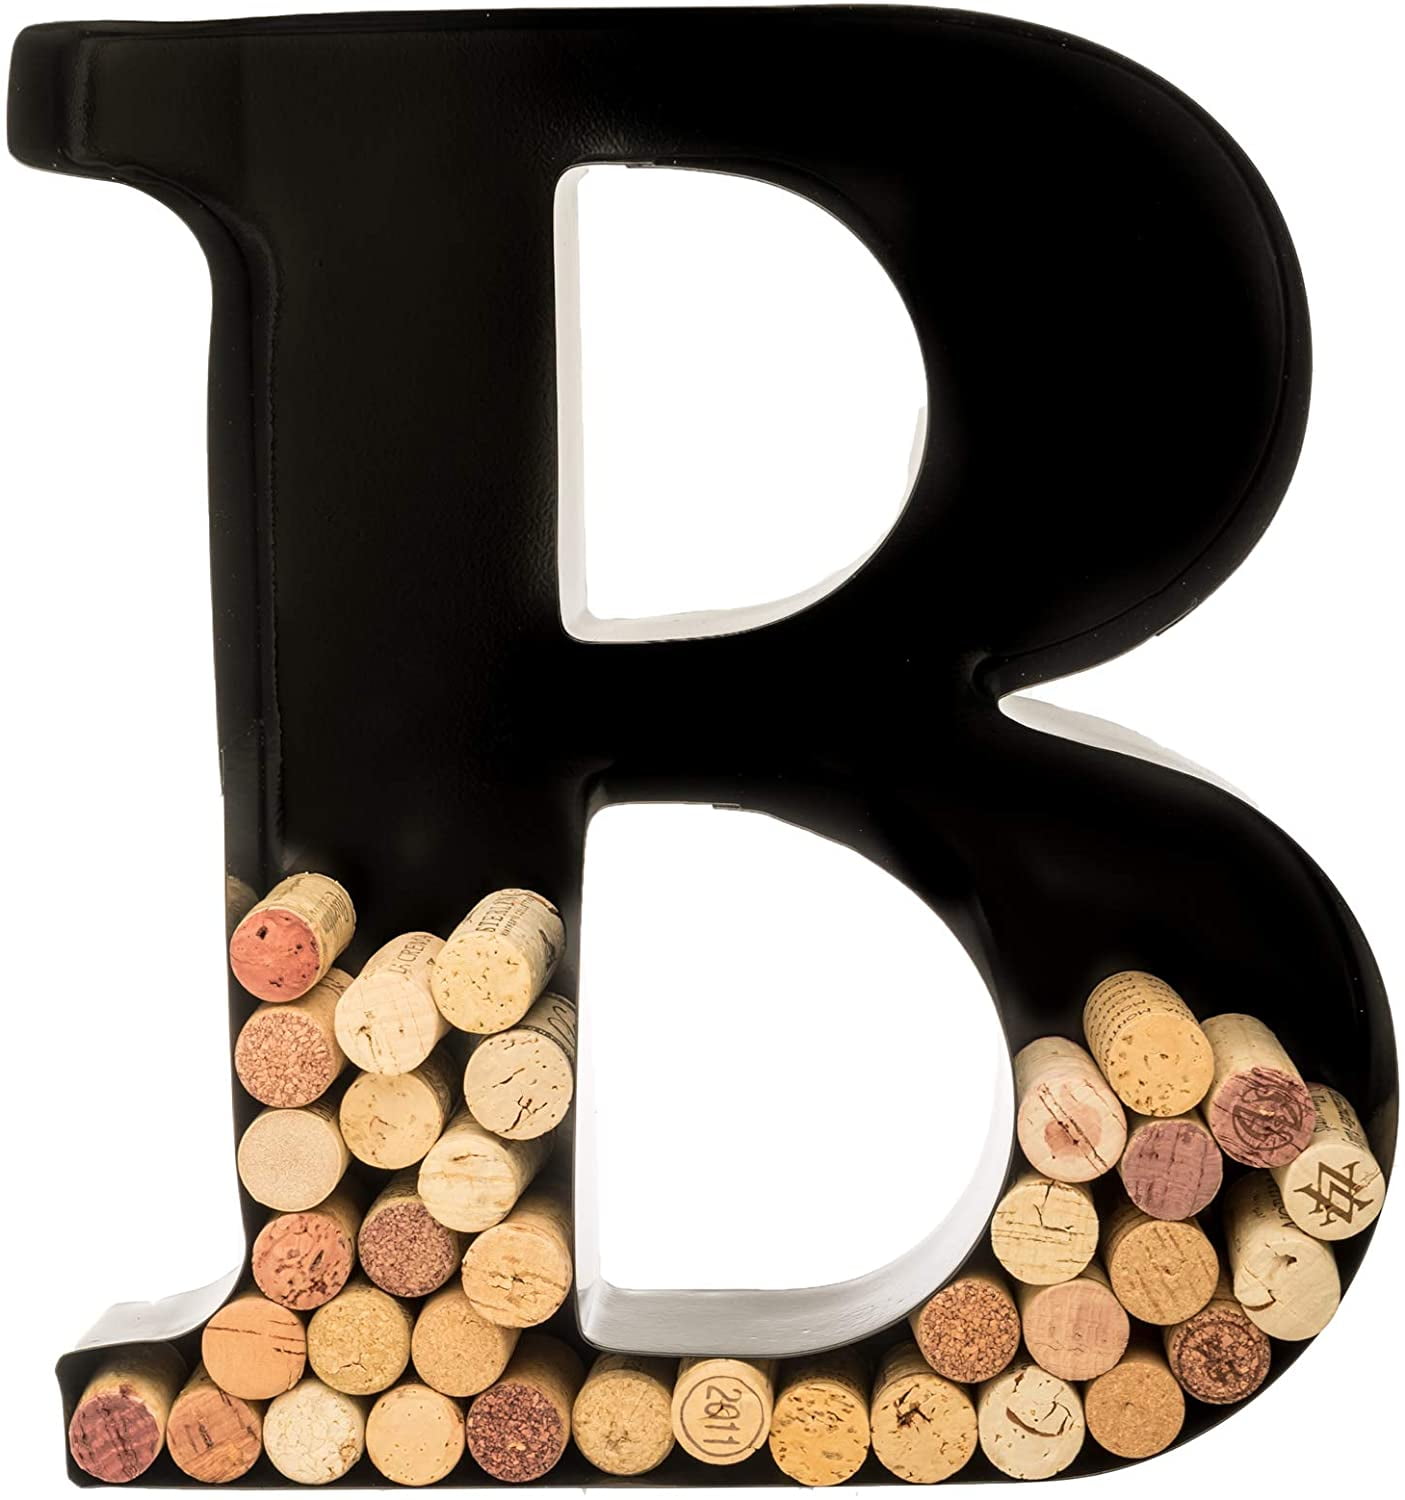 Engagement & Bridal Shower Gifts Black Personalized Wall Art P Metal Monogram Letter Home Décor Wine Cork Holder Wine Lover Gifts Housewarming Large